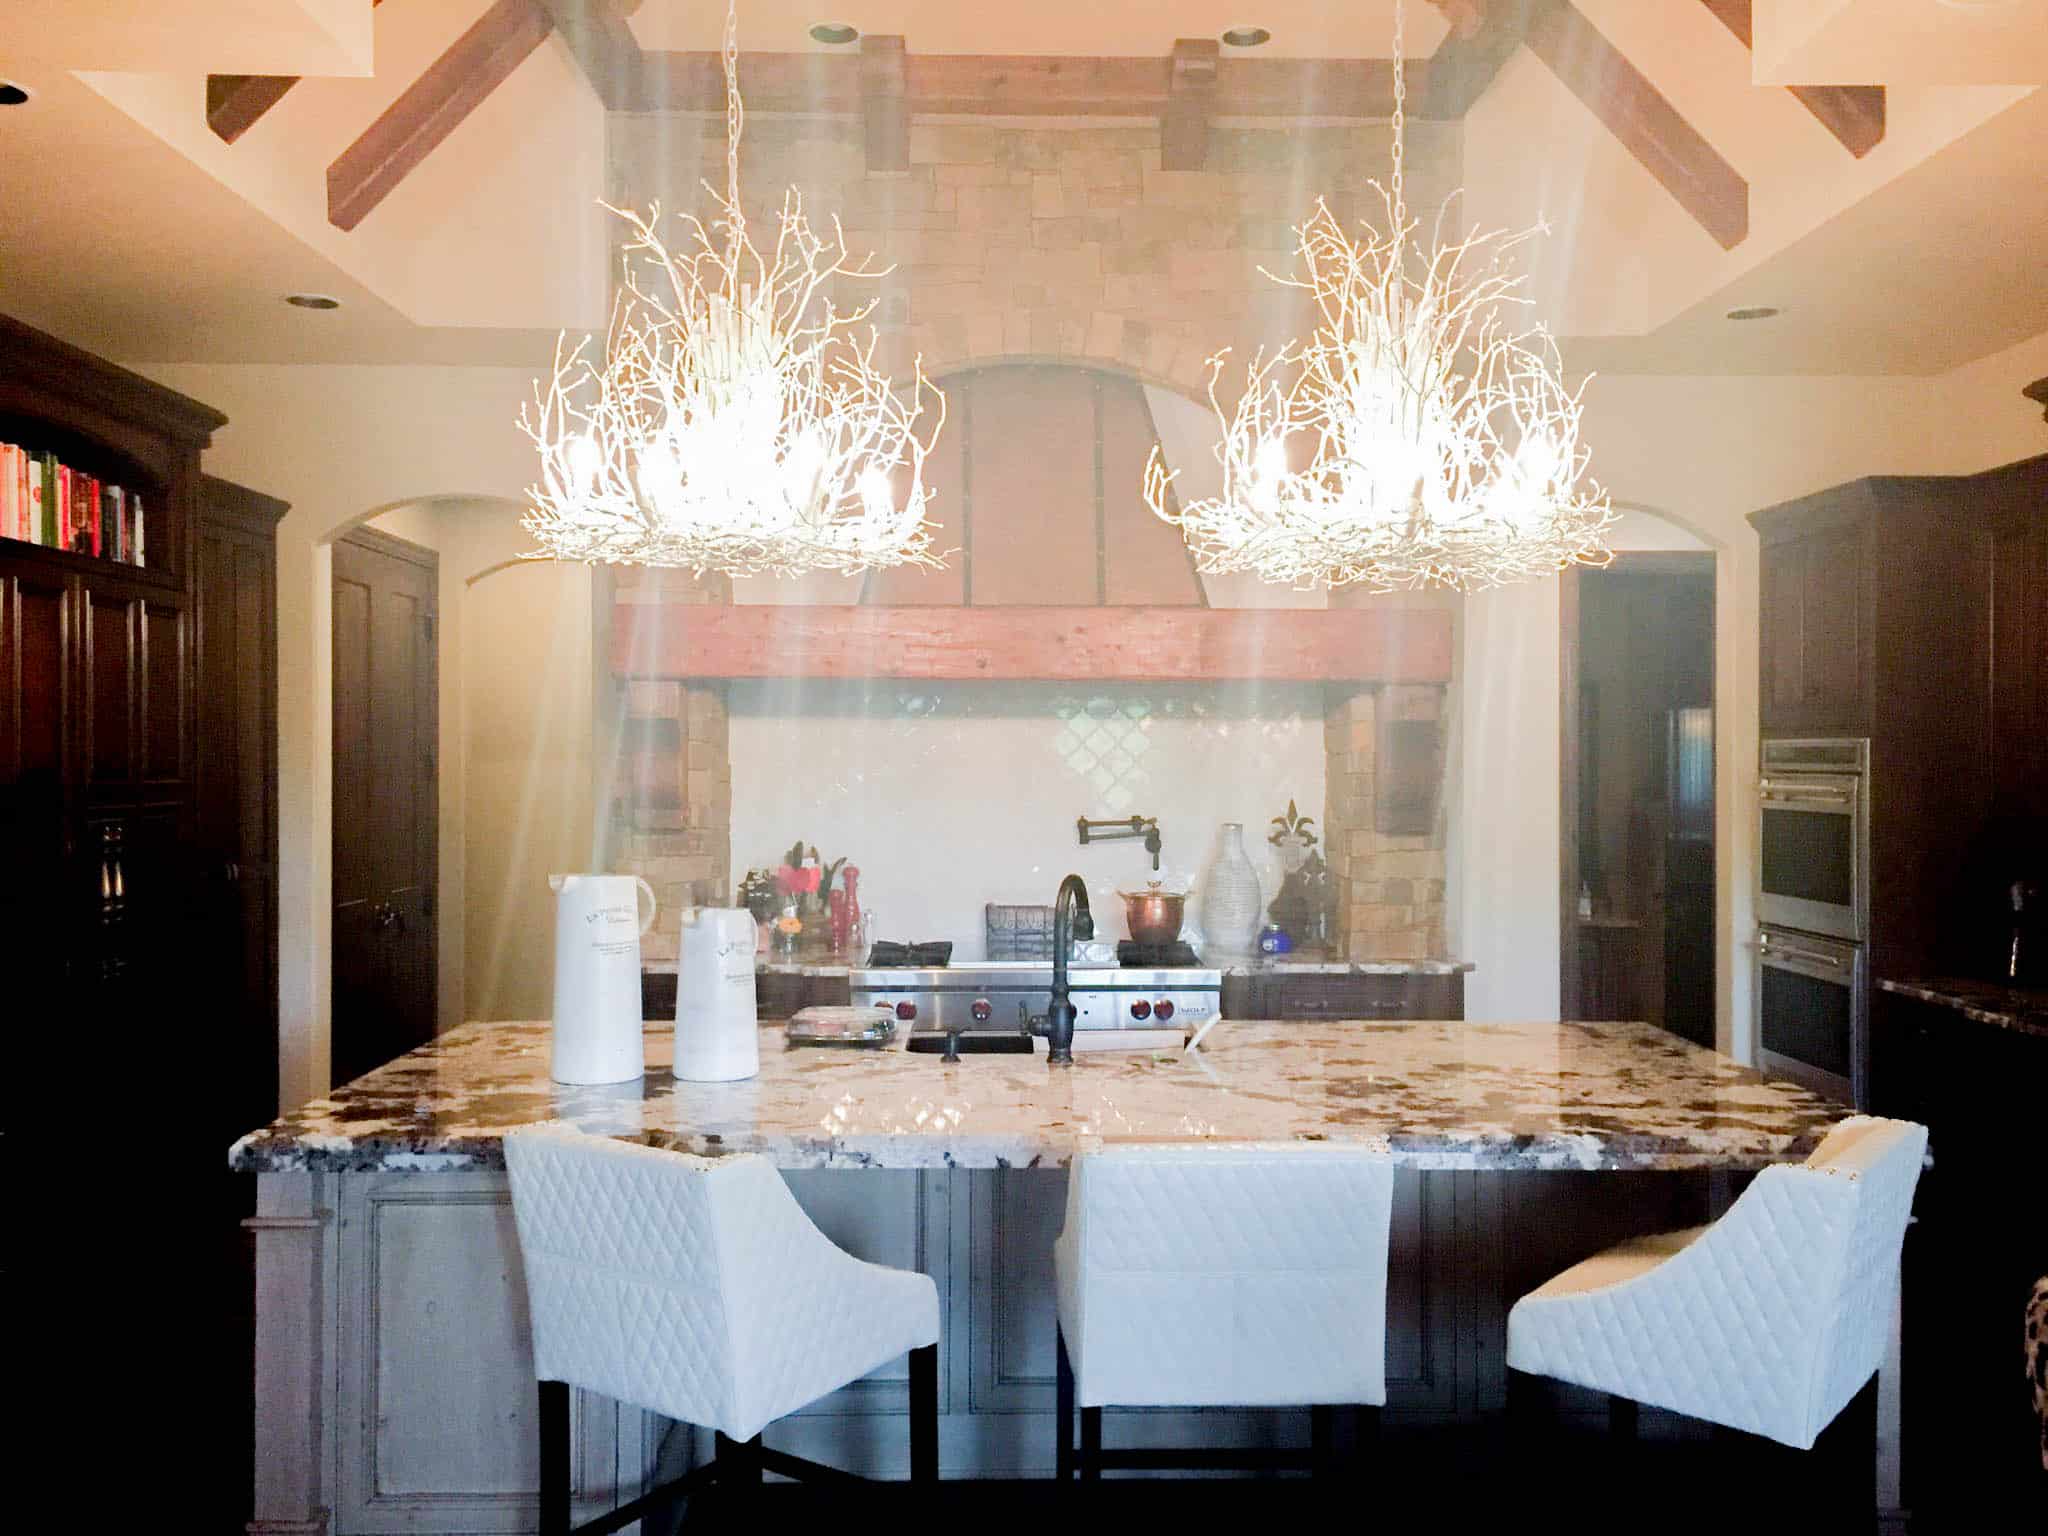 Farmhouse lighting in a kitchen